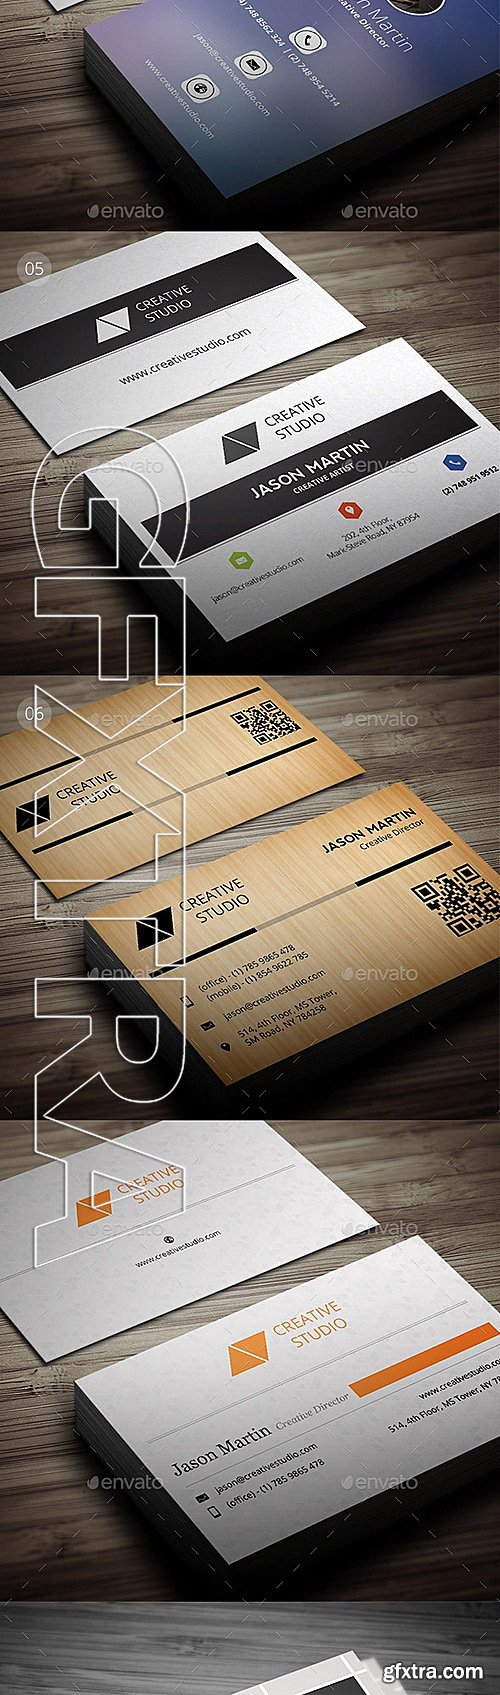 GraphicRiver - Bundle - Metro Business Cards - 6 in 1 - 120 11789671